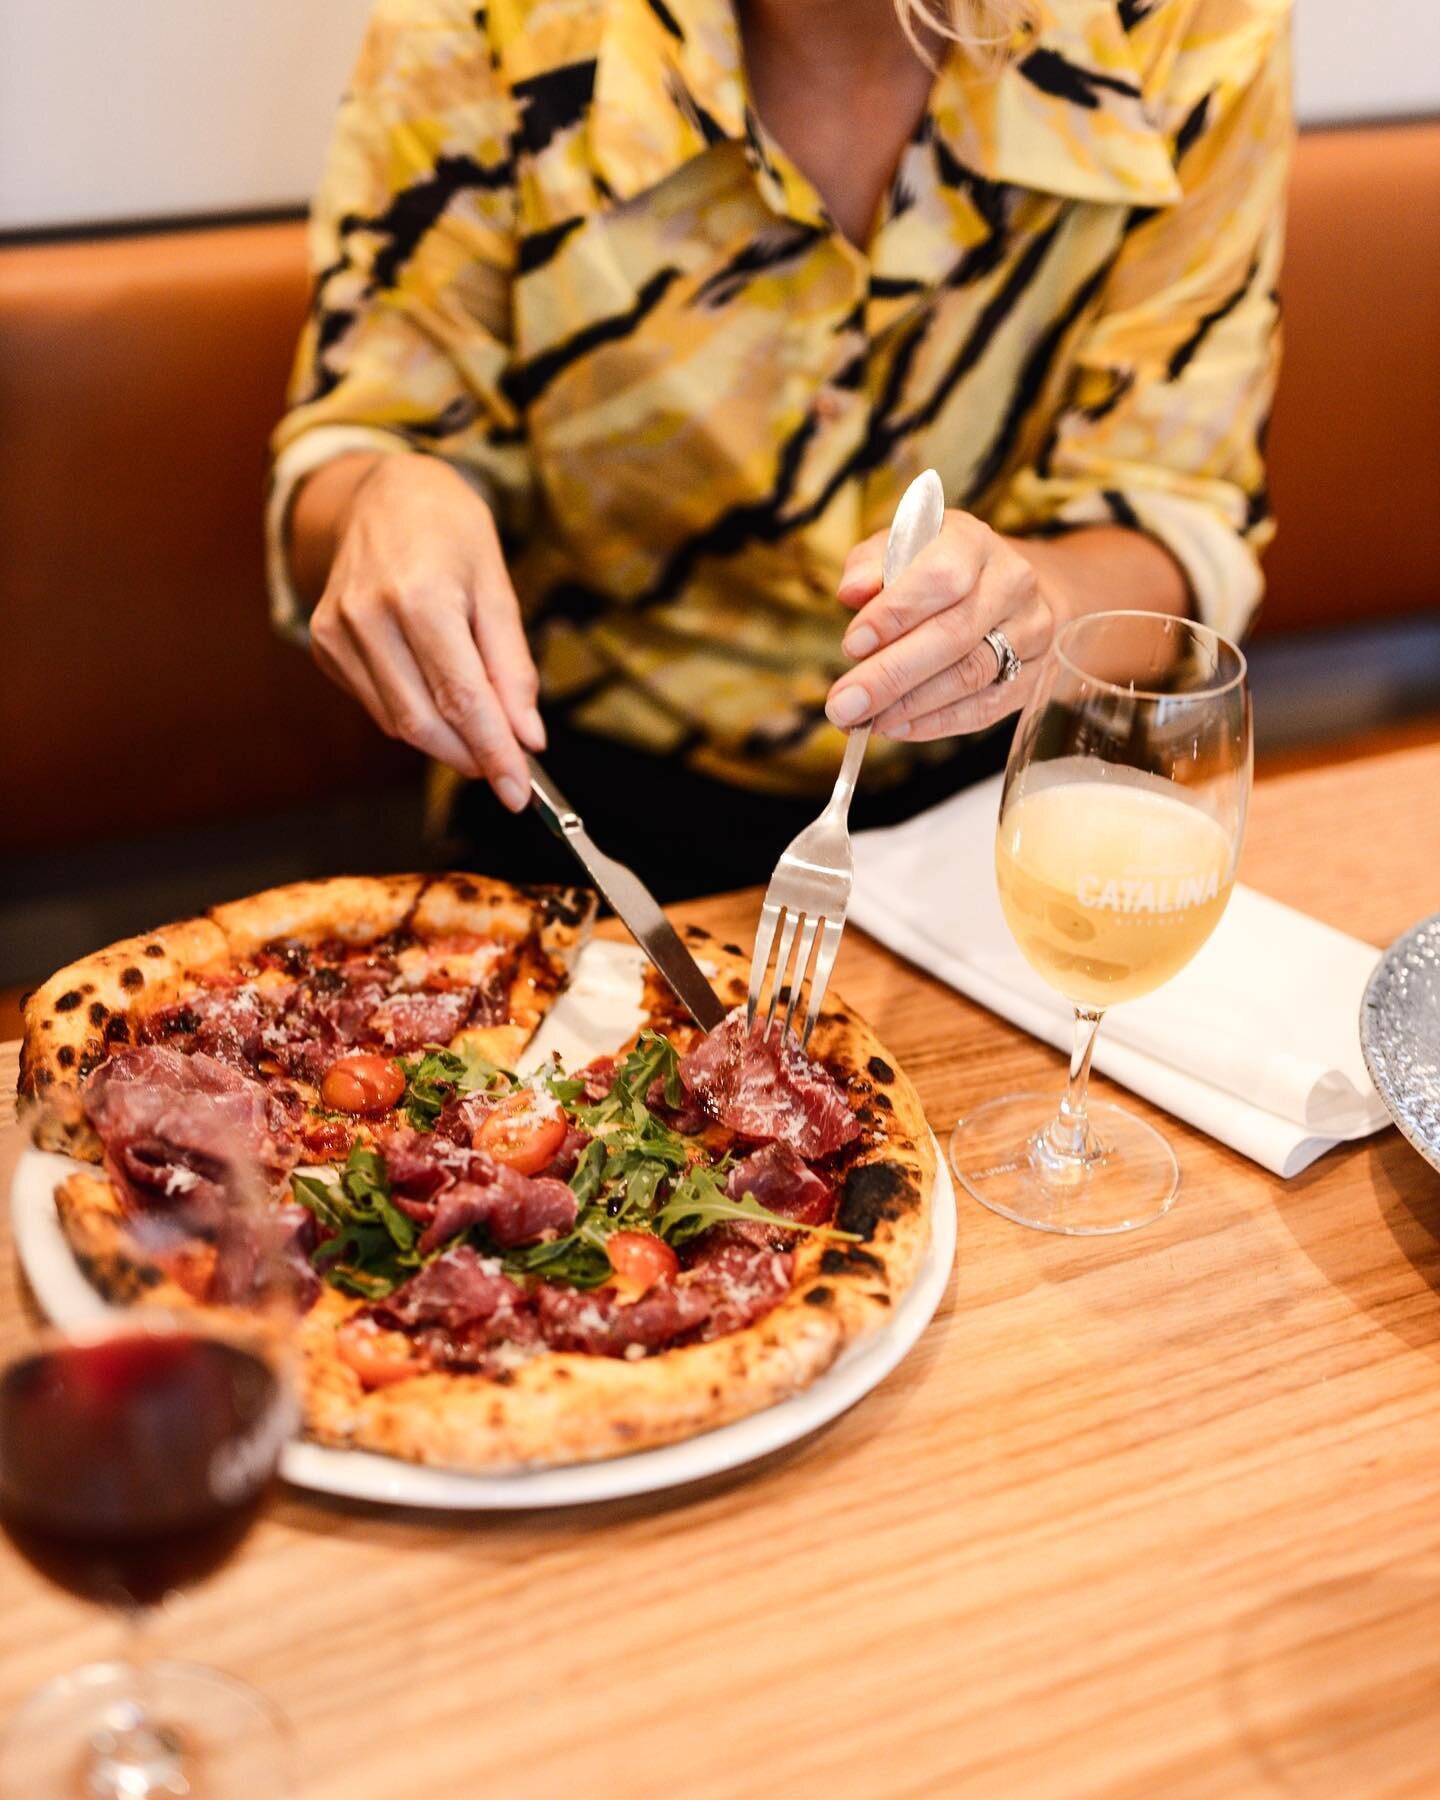 Date night sorted.

You can also order online now via @ubereats_aus to get our pizzas delivered